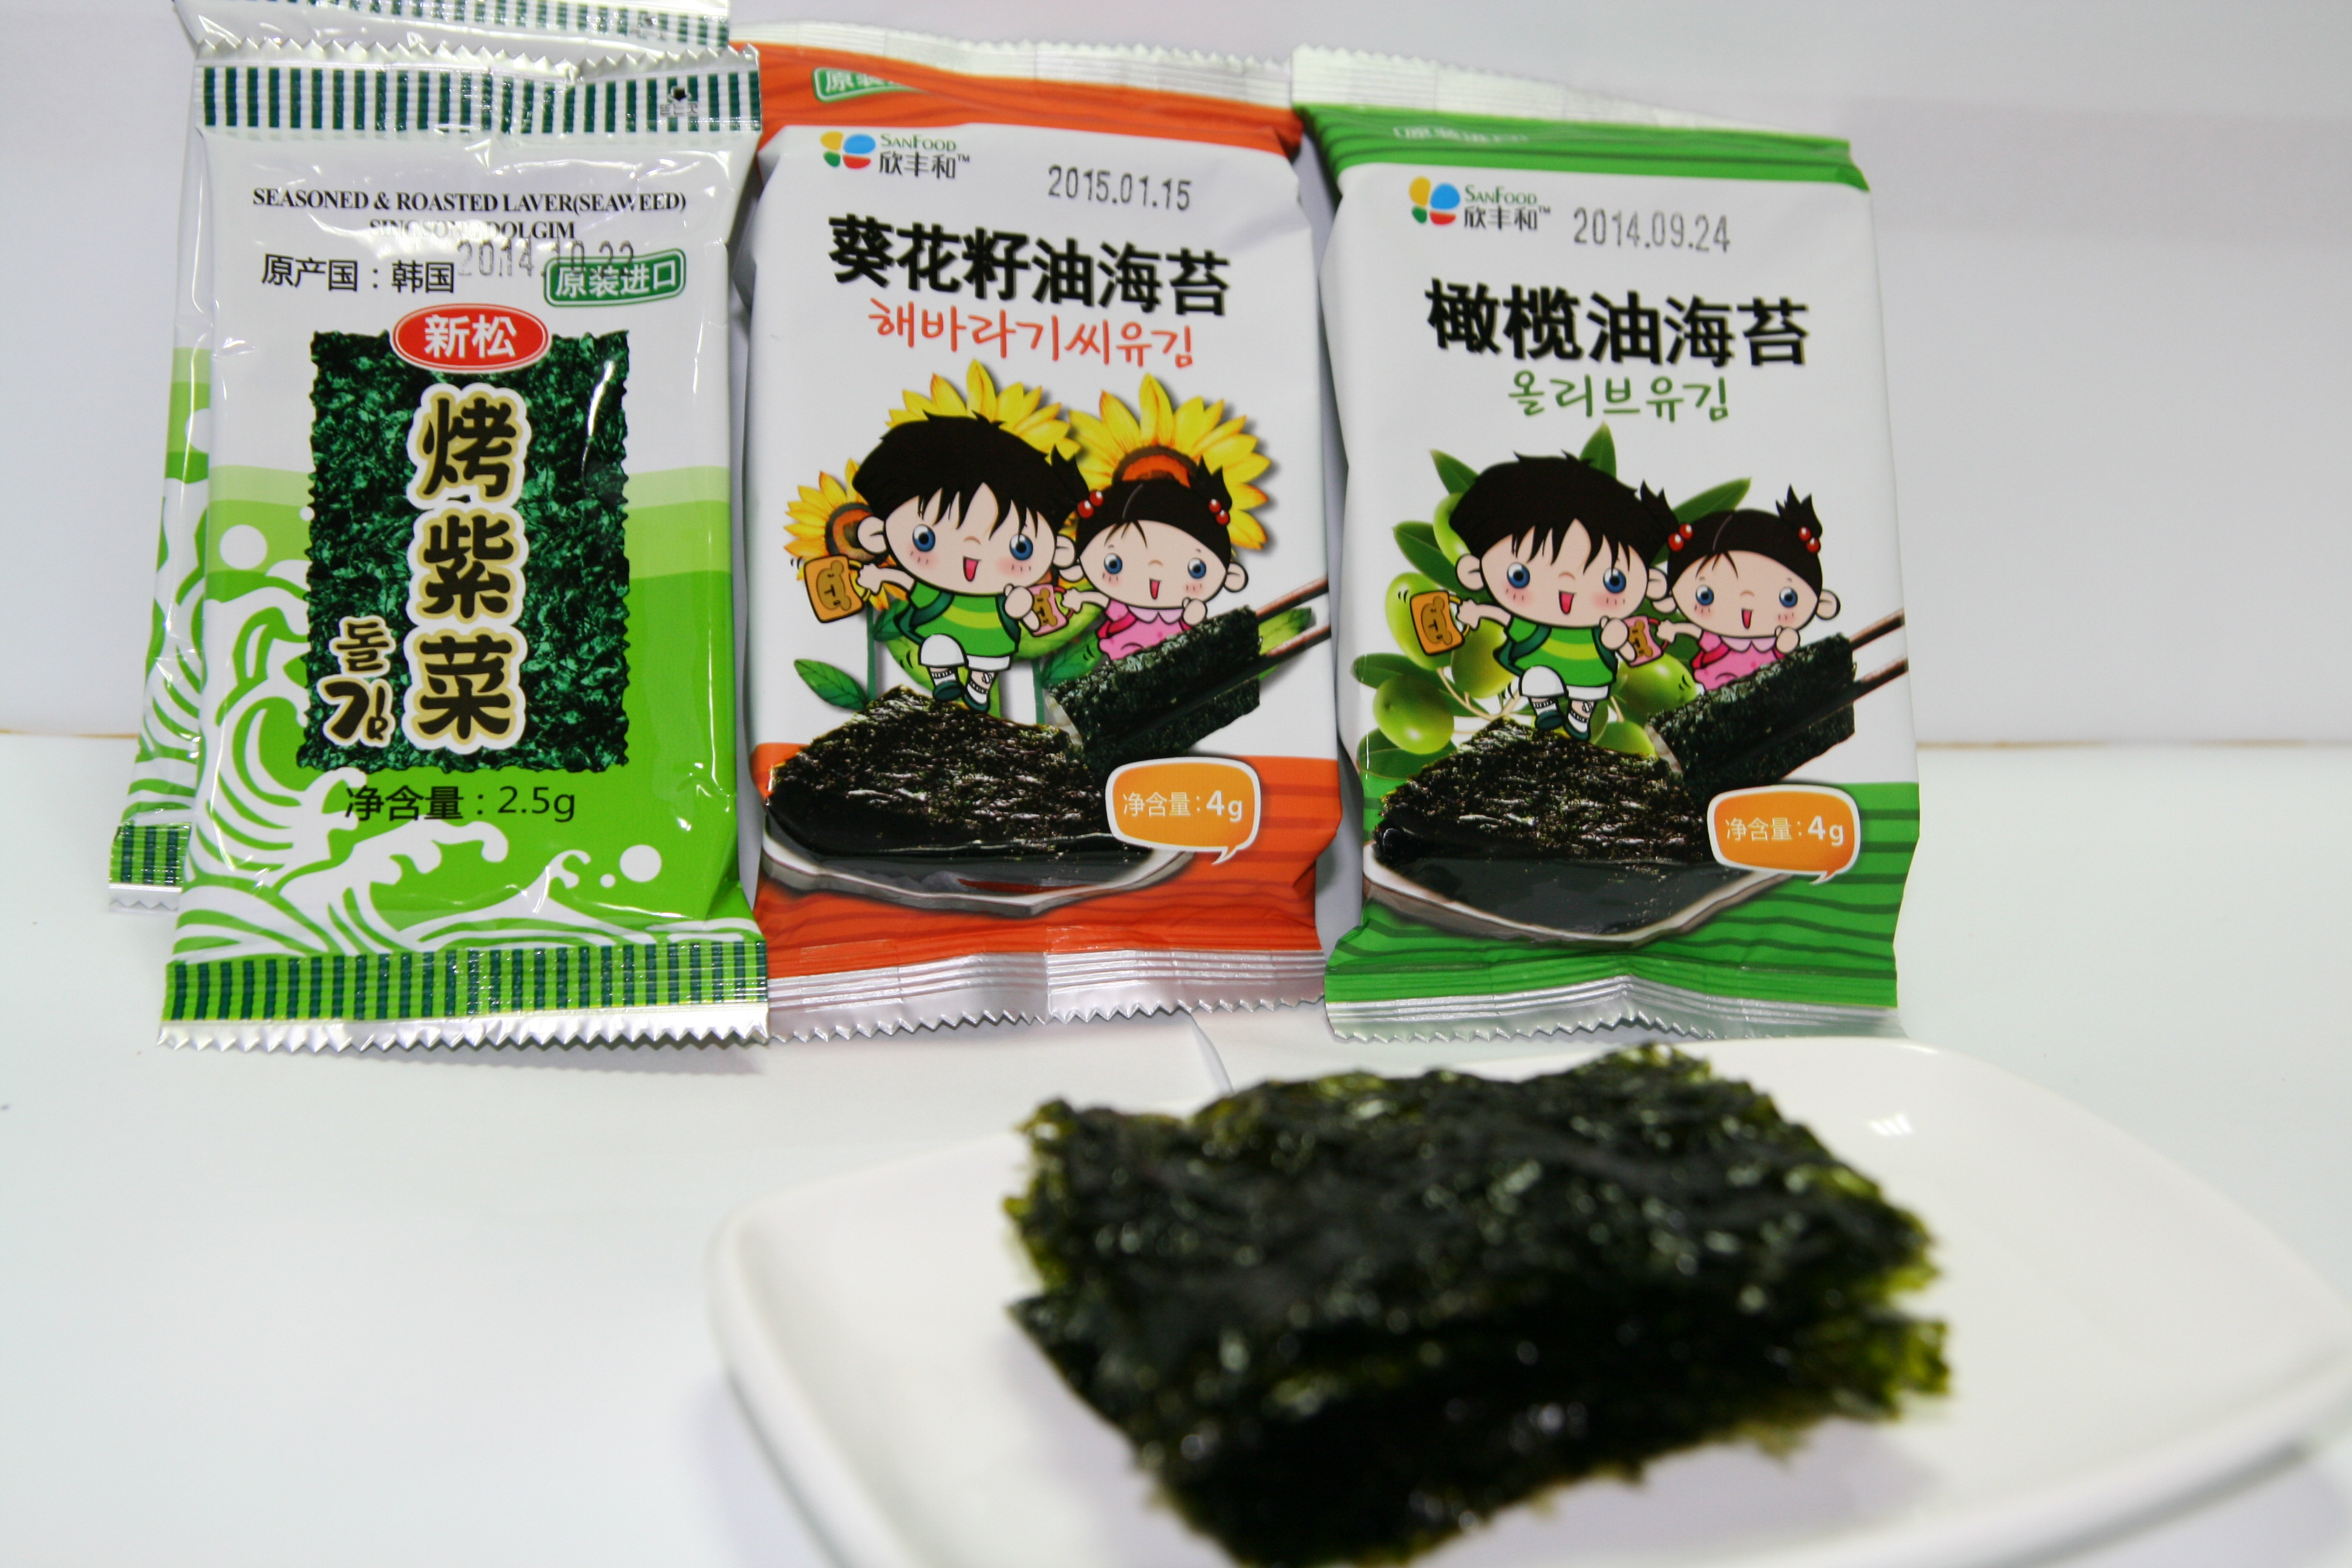 foodstuffs. laver, SUNFLOWER SEED OILED LAVER, OLIVE OILED LAVER, export by Hainong. co.,Ltd. http://www.hainong.com